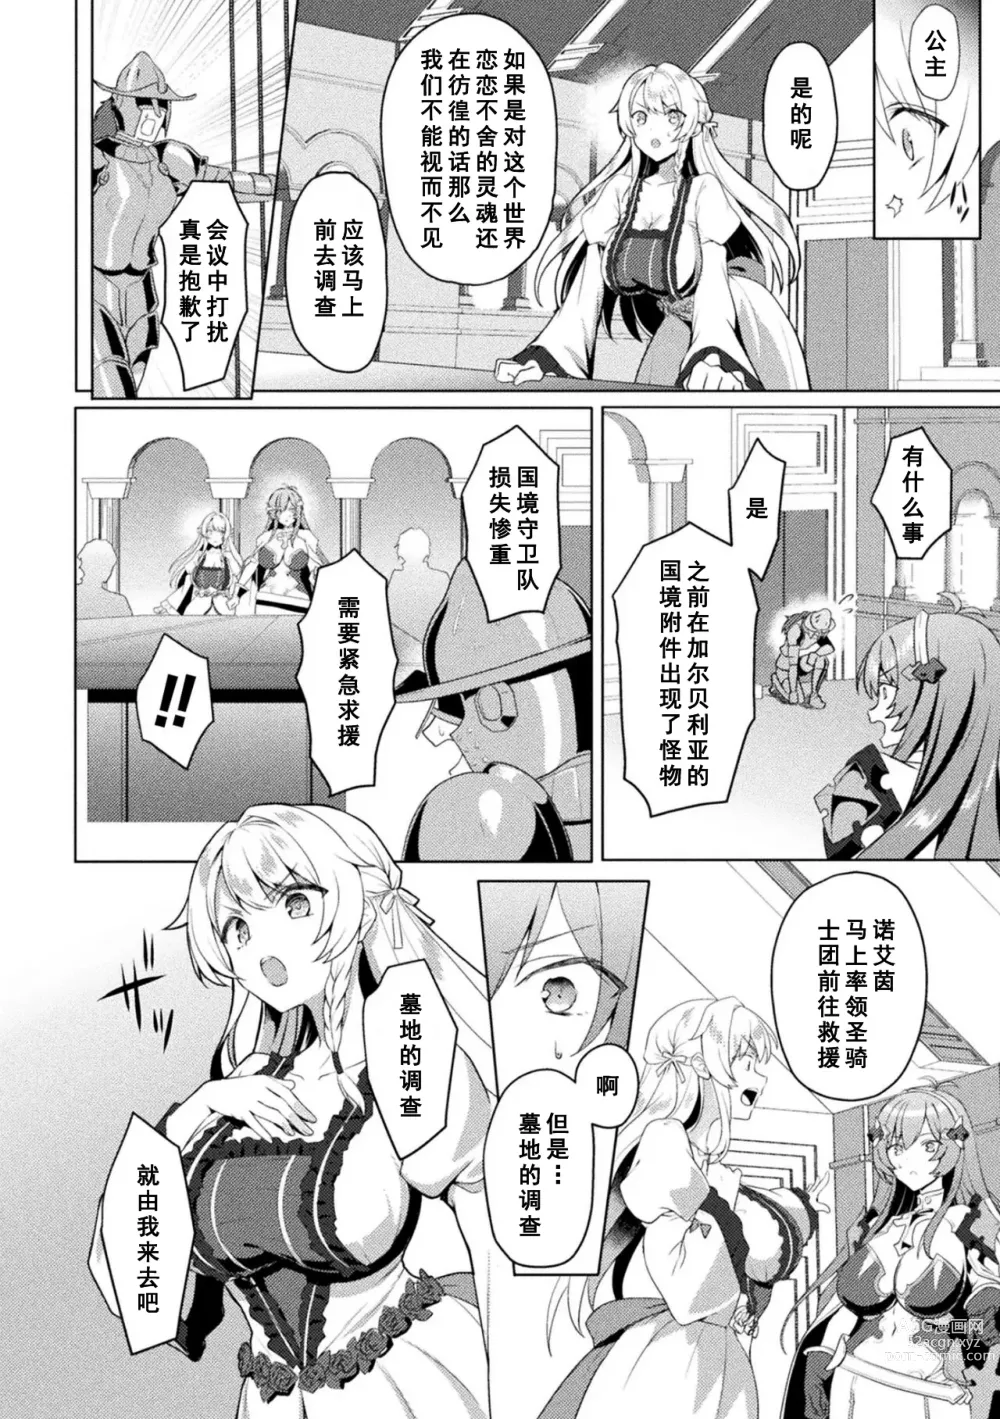 Page 6 of manga Edens Ritter Ch. 1 Gaiden - Innan no Mikohime Cecily Hen THE COMIC Ch. 1